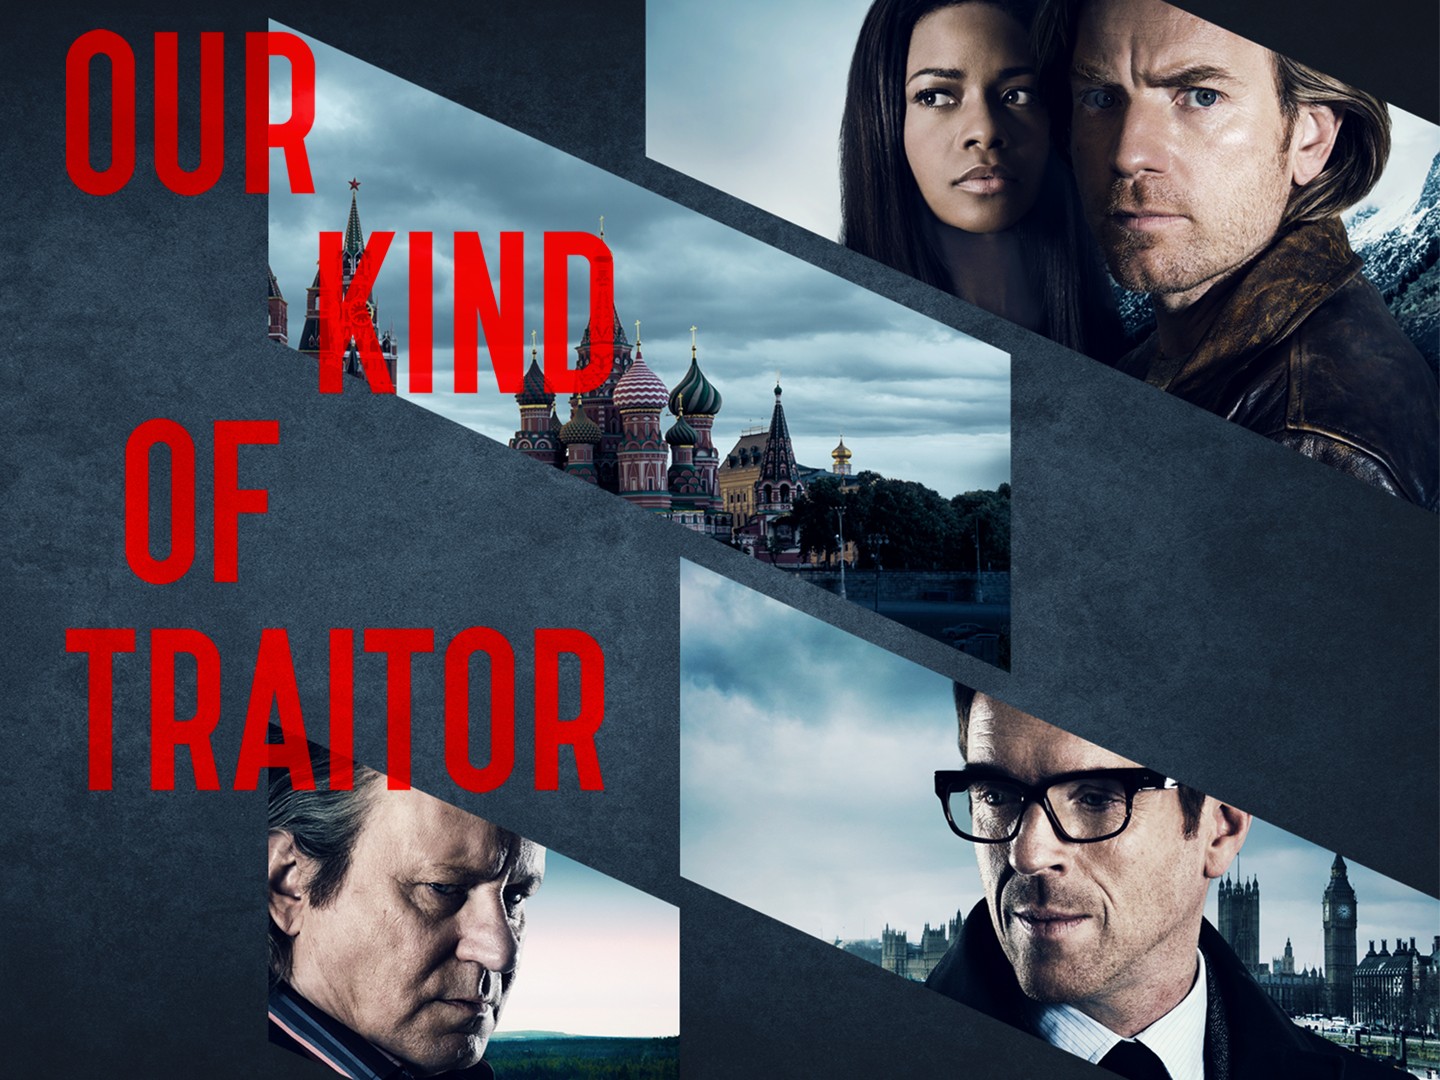 Our Kind of Traitor (film) - Wikipedia